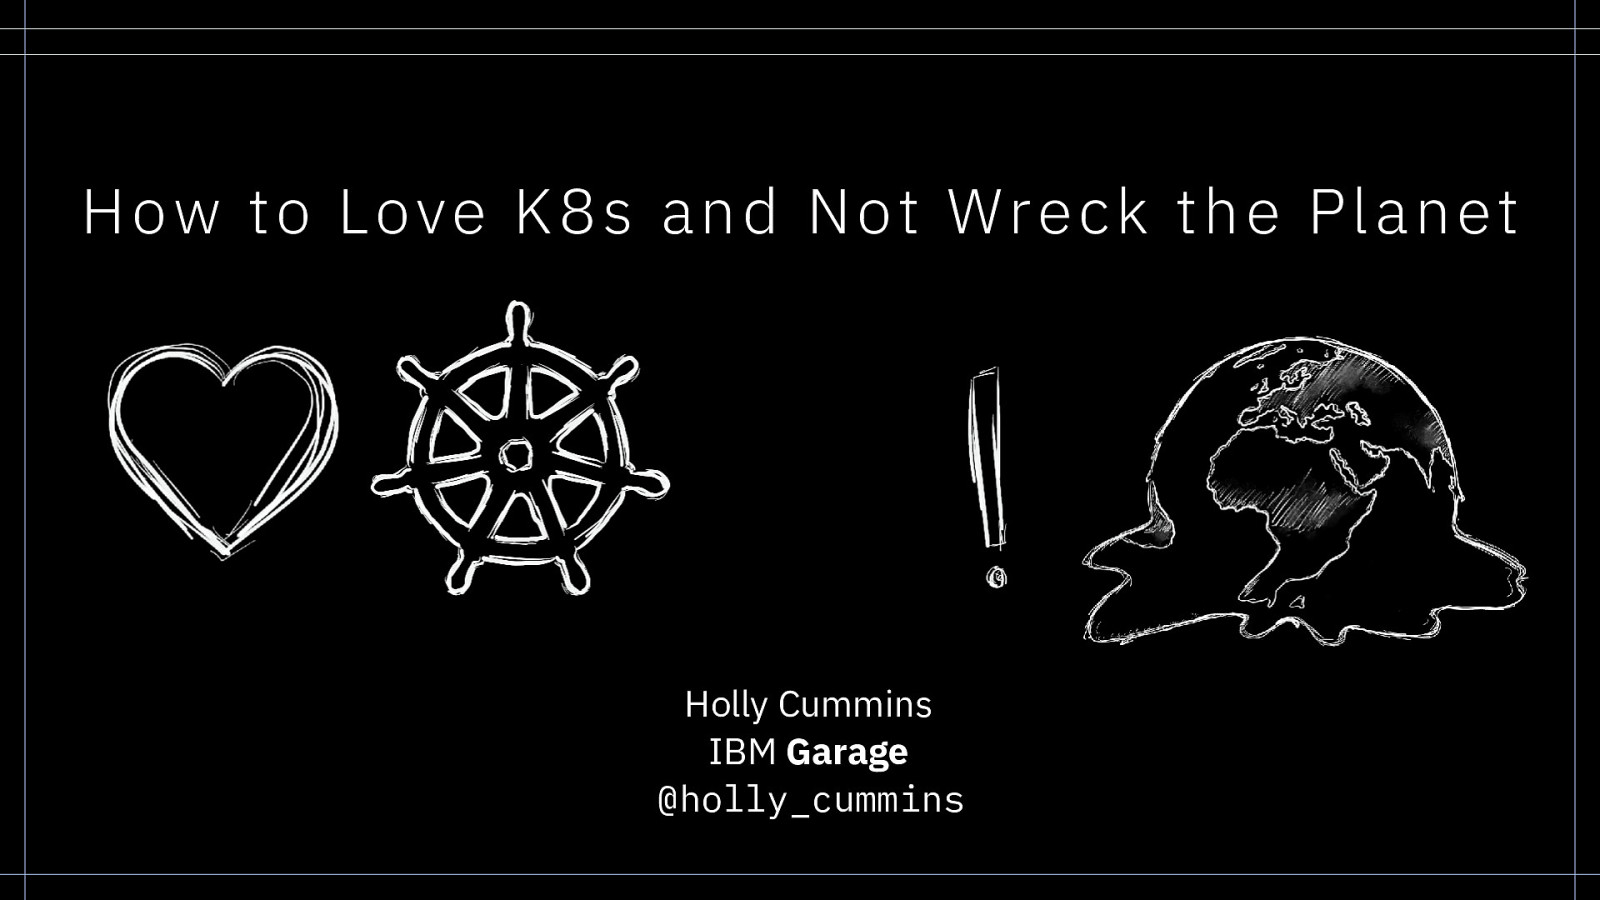 How to Love K8s and Not Wreck the Planet